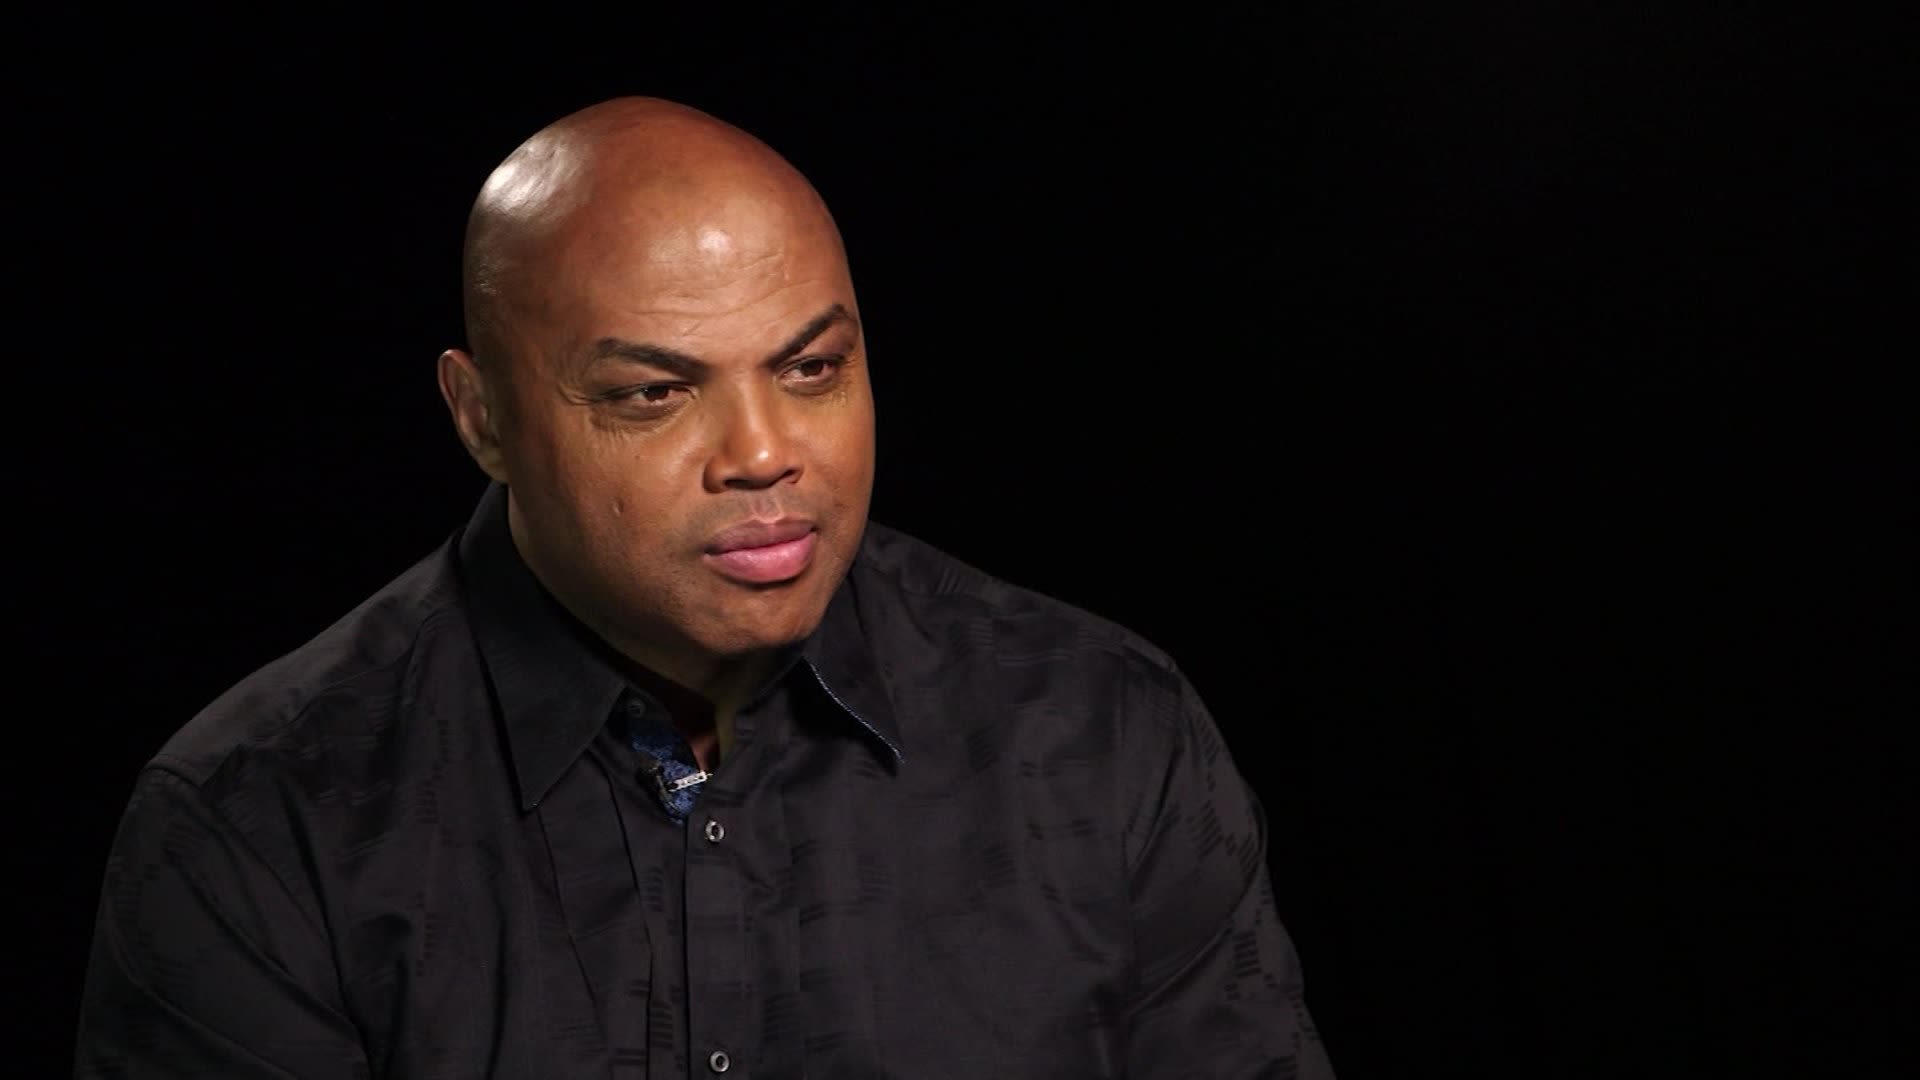 Charles Barkley to sell 1996 Olympic basketball gold medal